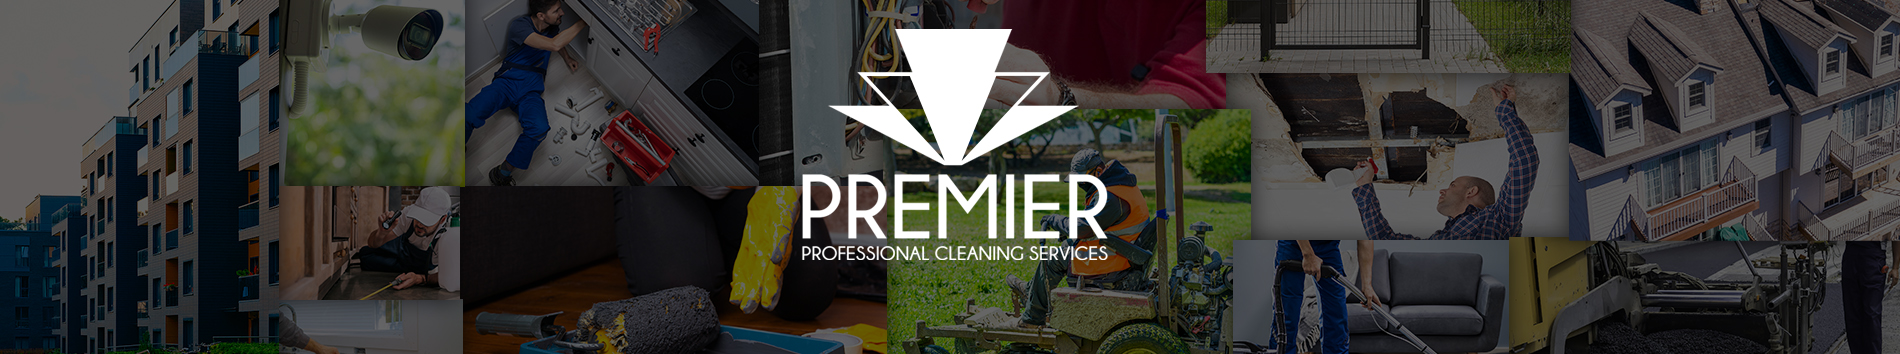 Premier Professional Cleaning Service